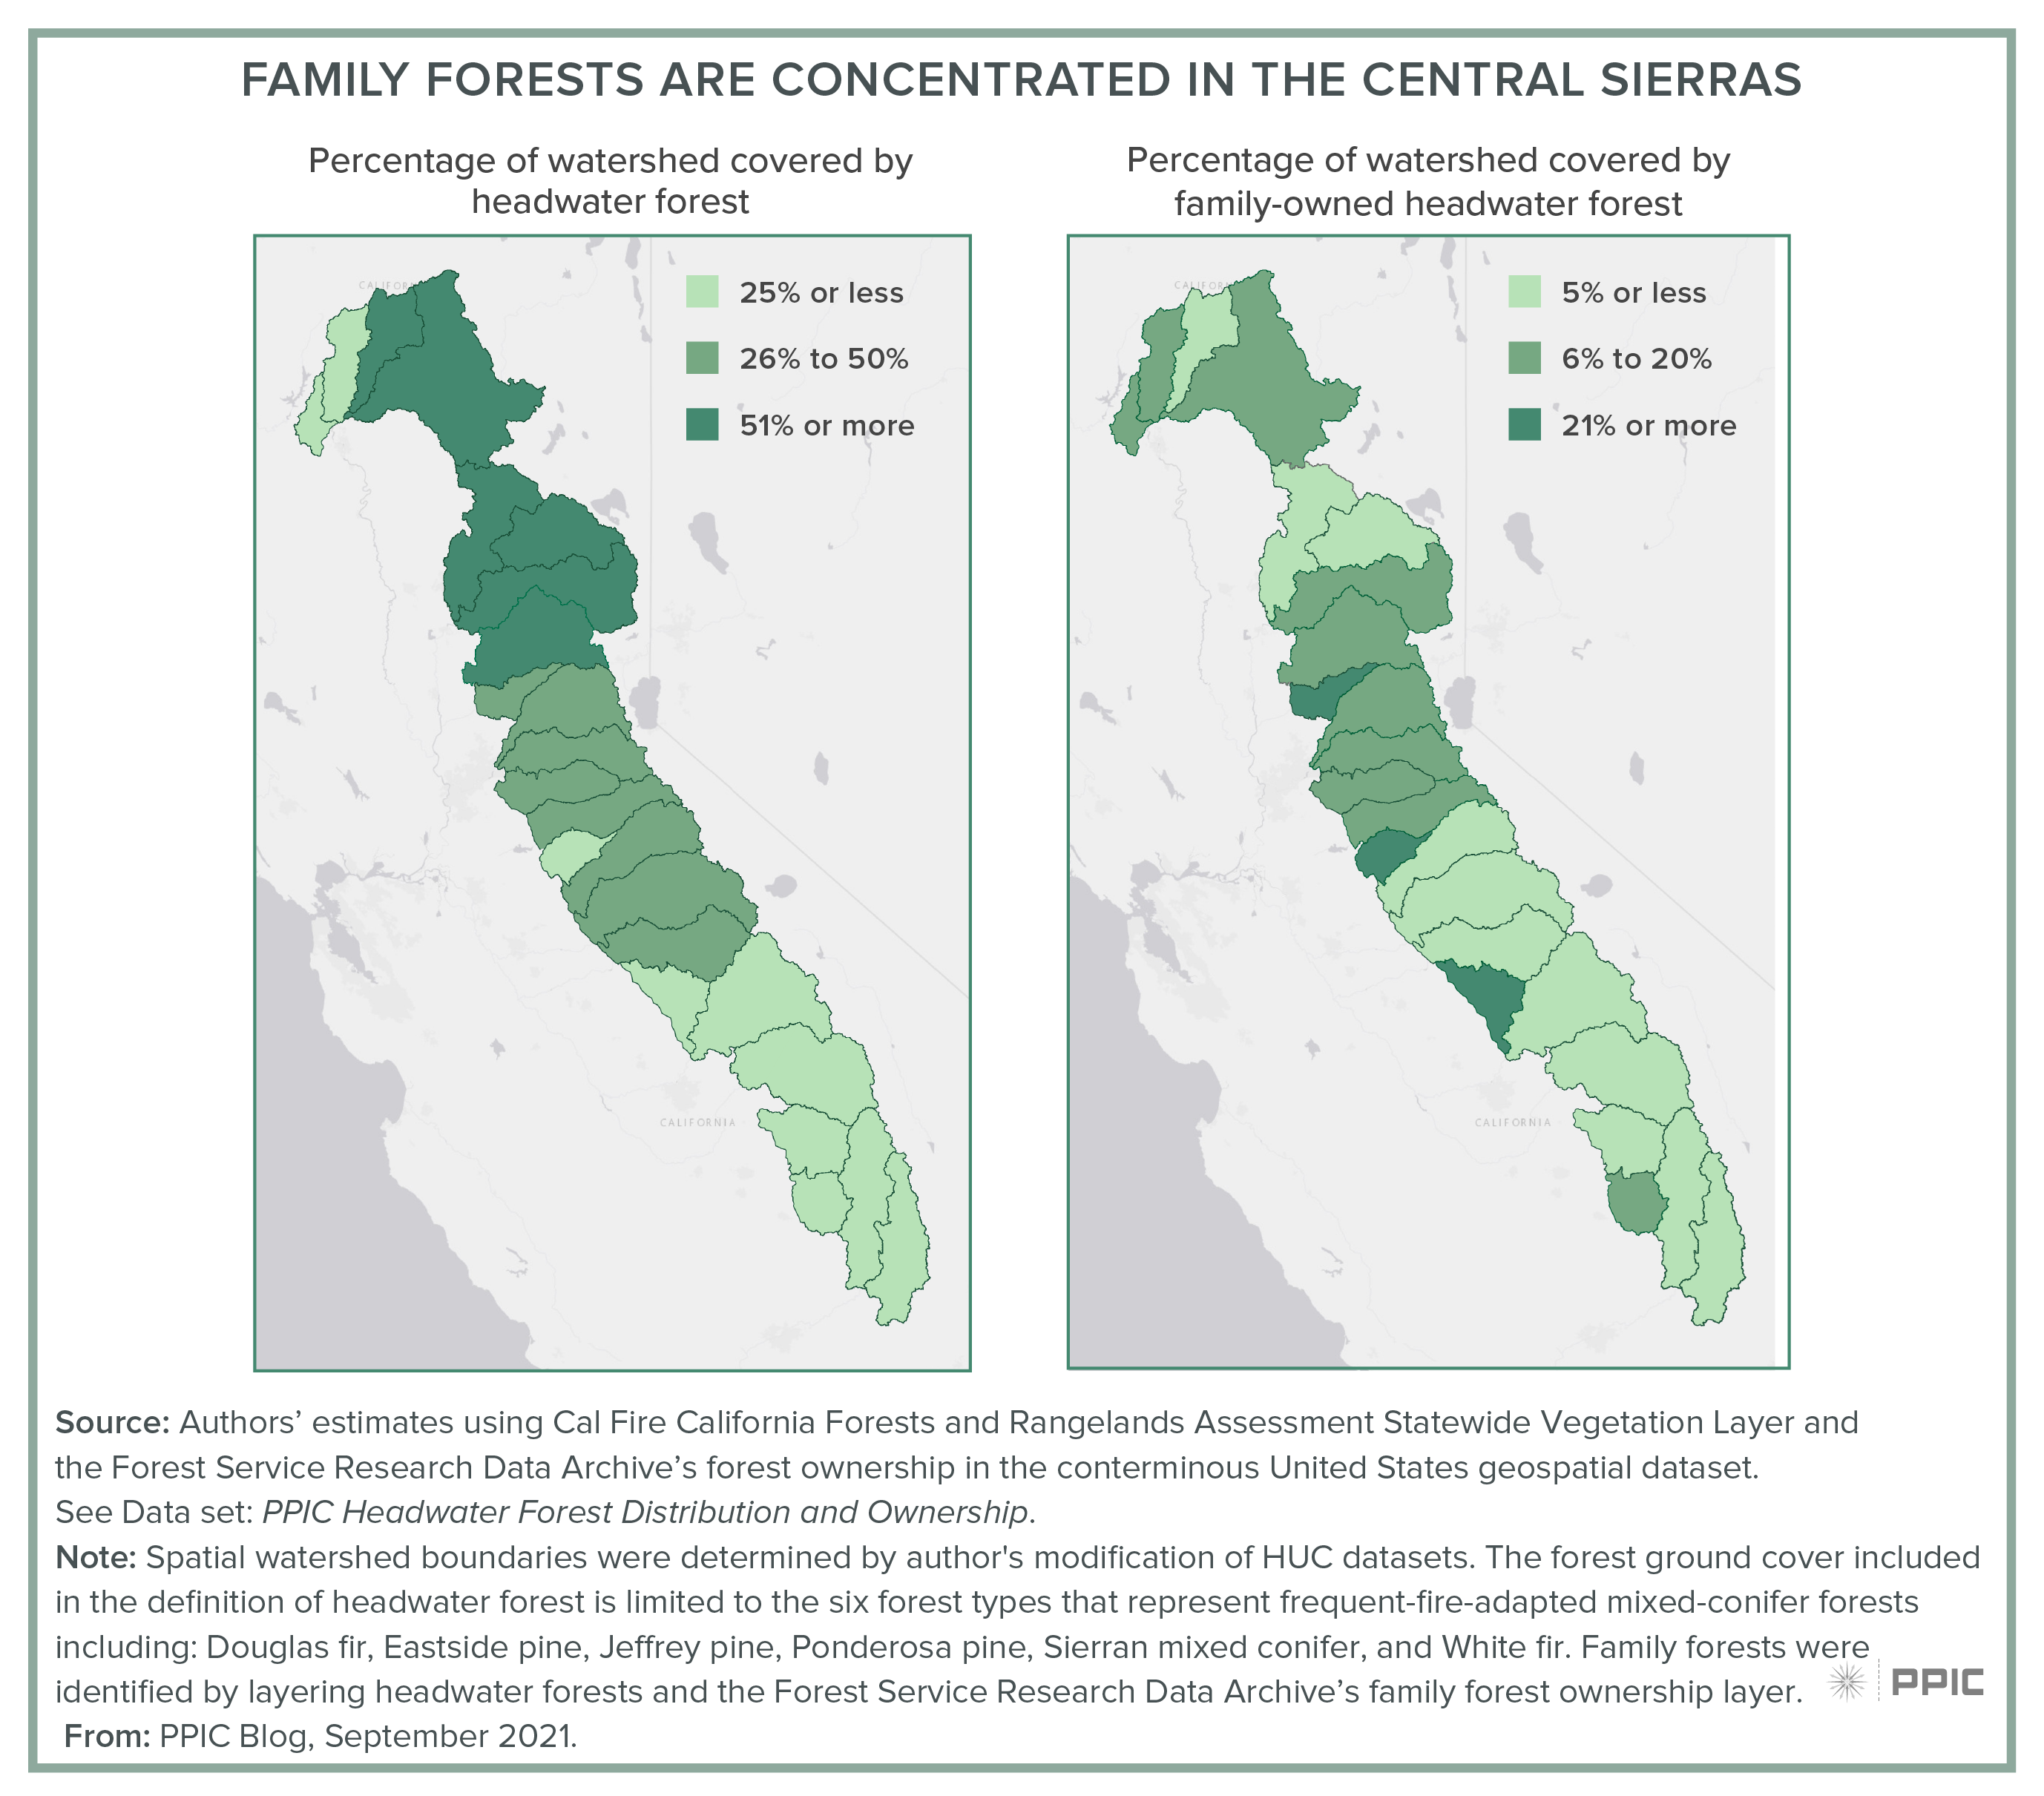 figure - Family Forests Are Concentrated in the Central Sierras